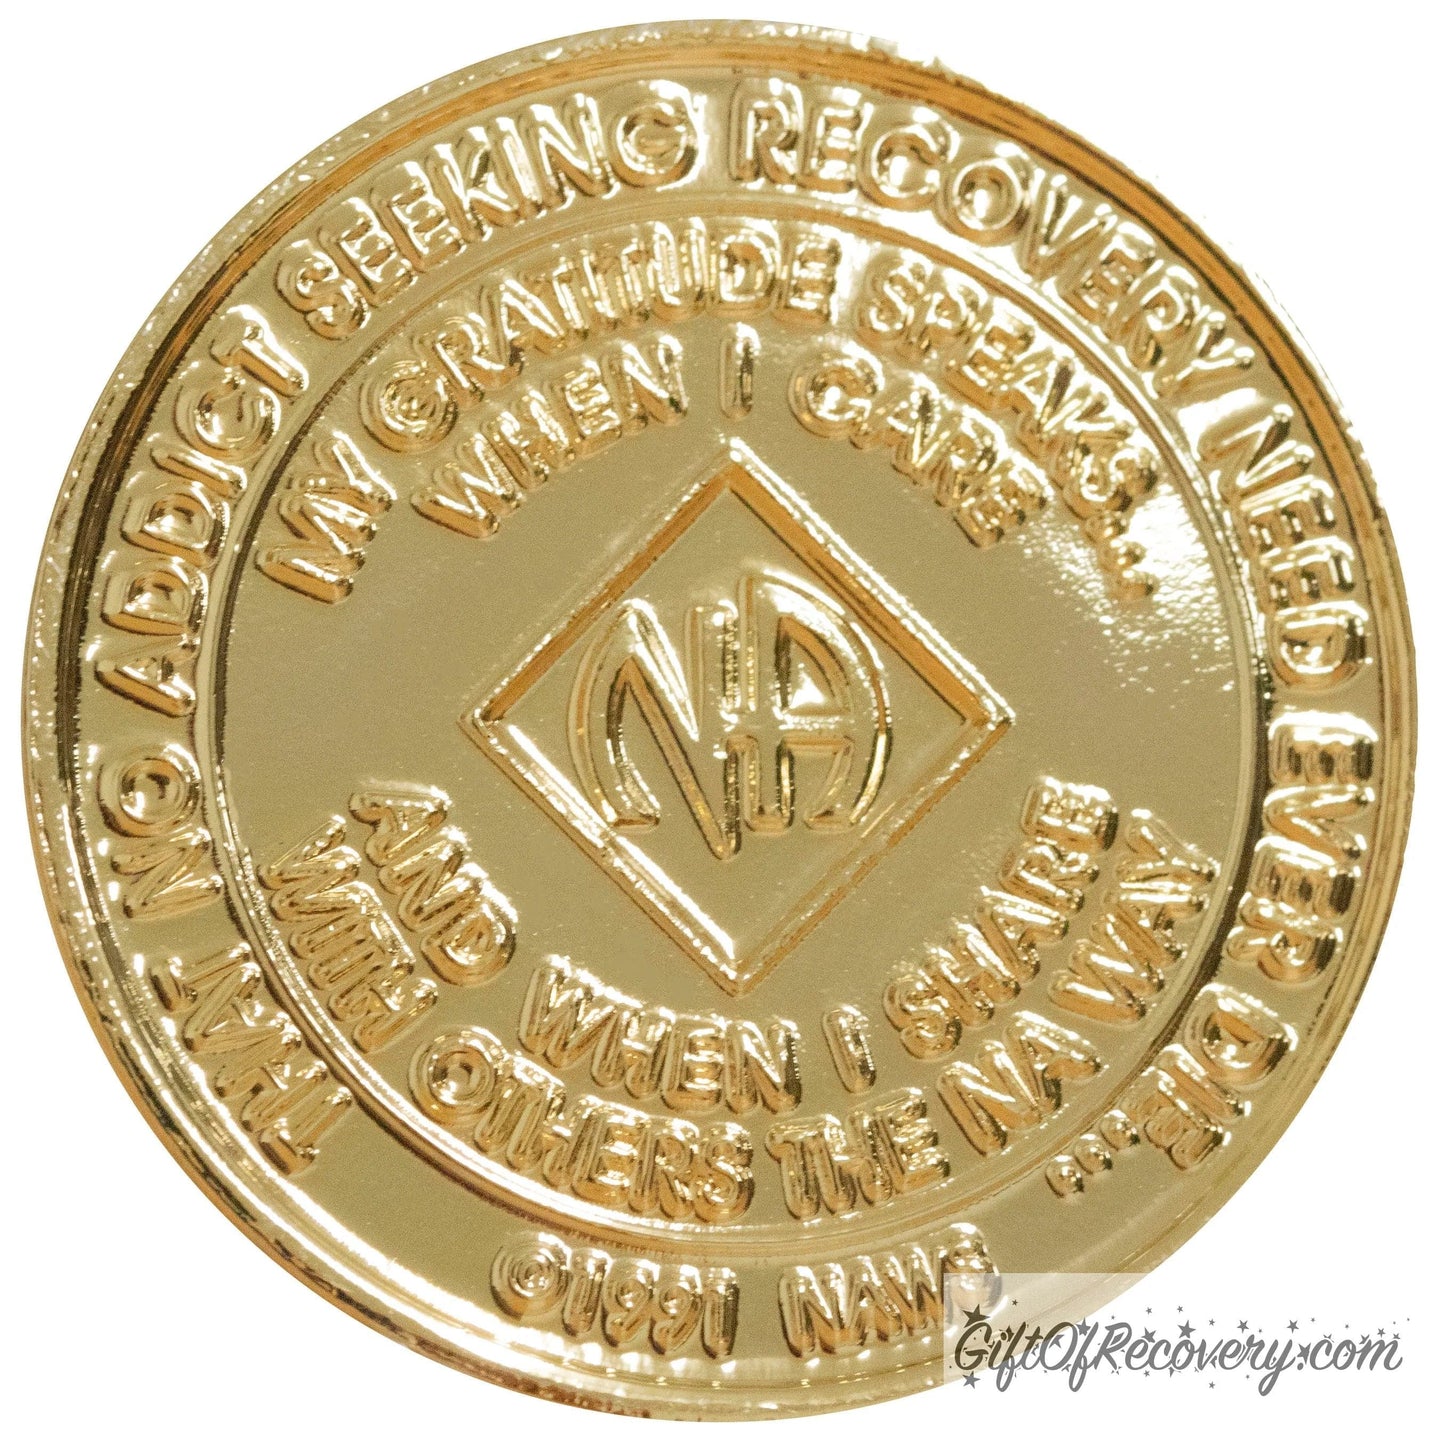 Clean Time Chip Narcotics Anonymous Gold with Diamond Shaped Crystal (Scarlet Red)